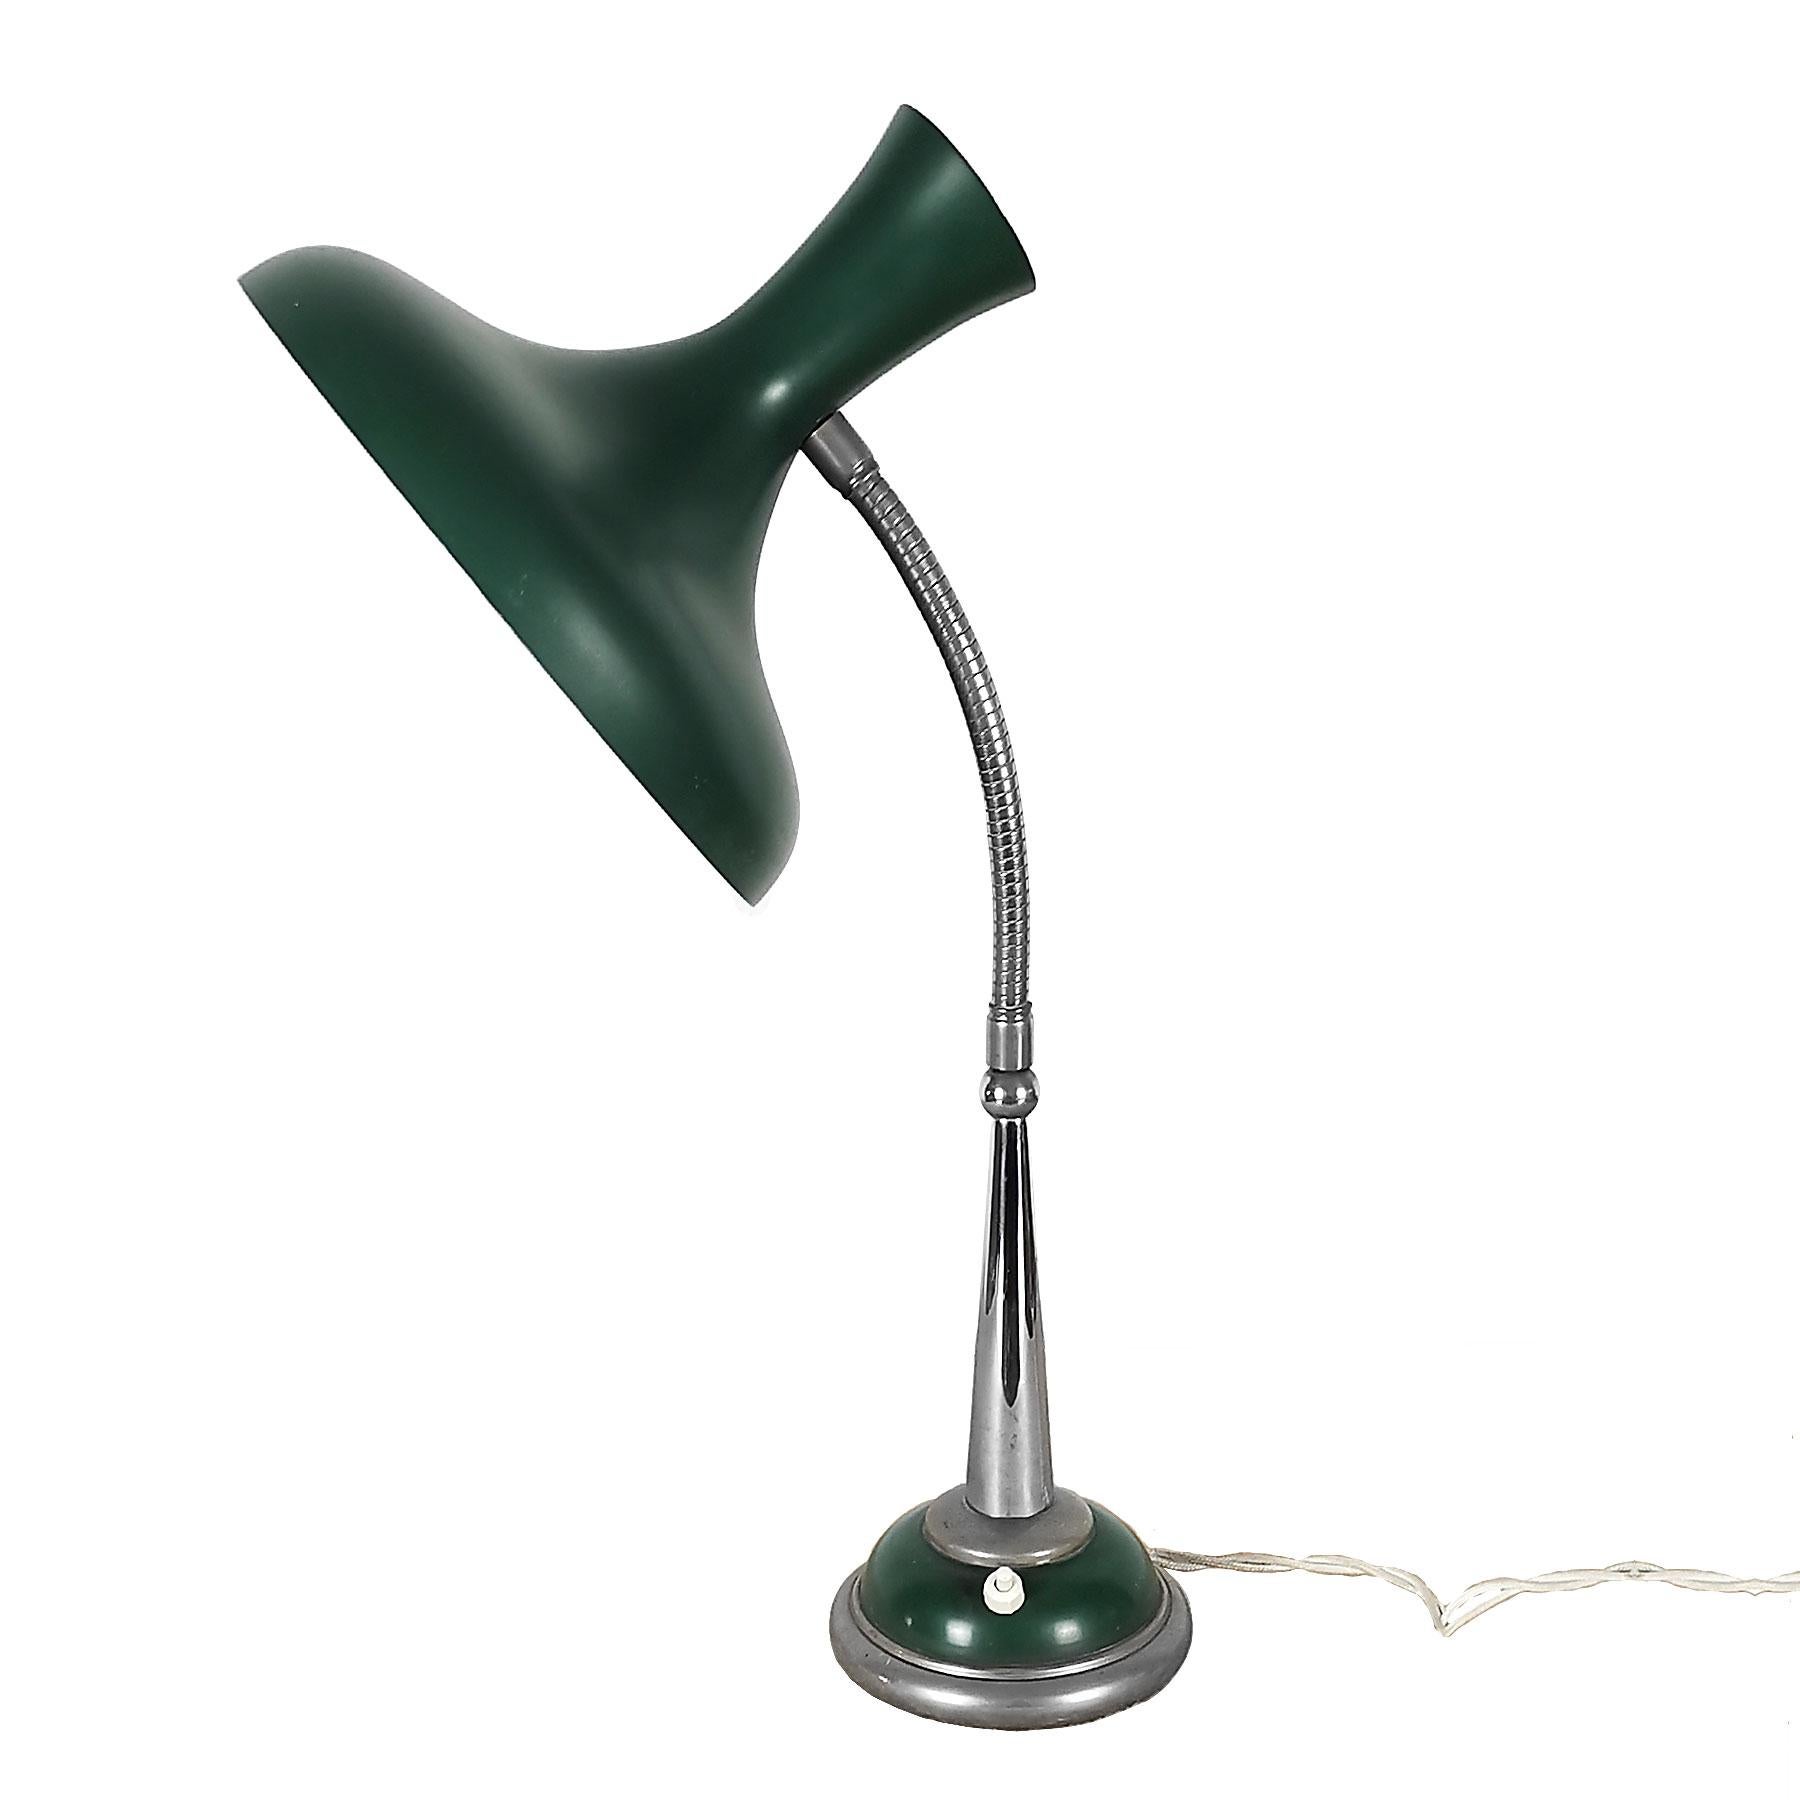 Green desk lamp, painted sheet metal and chrome plated.

France, c. 1950.